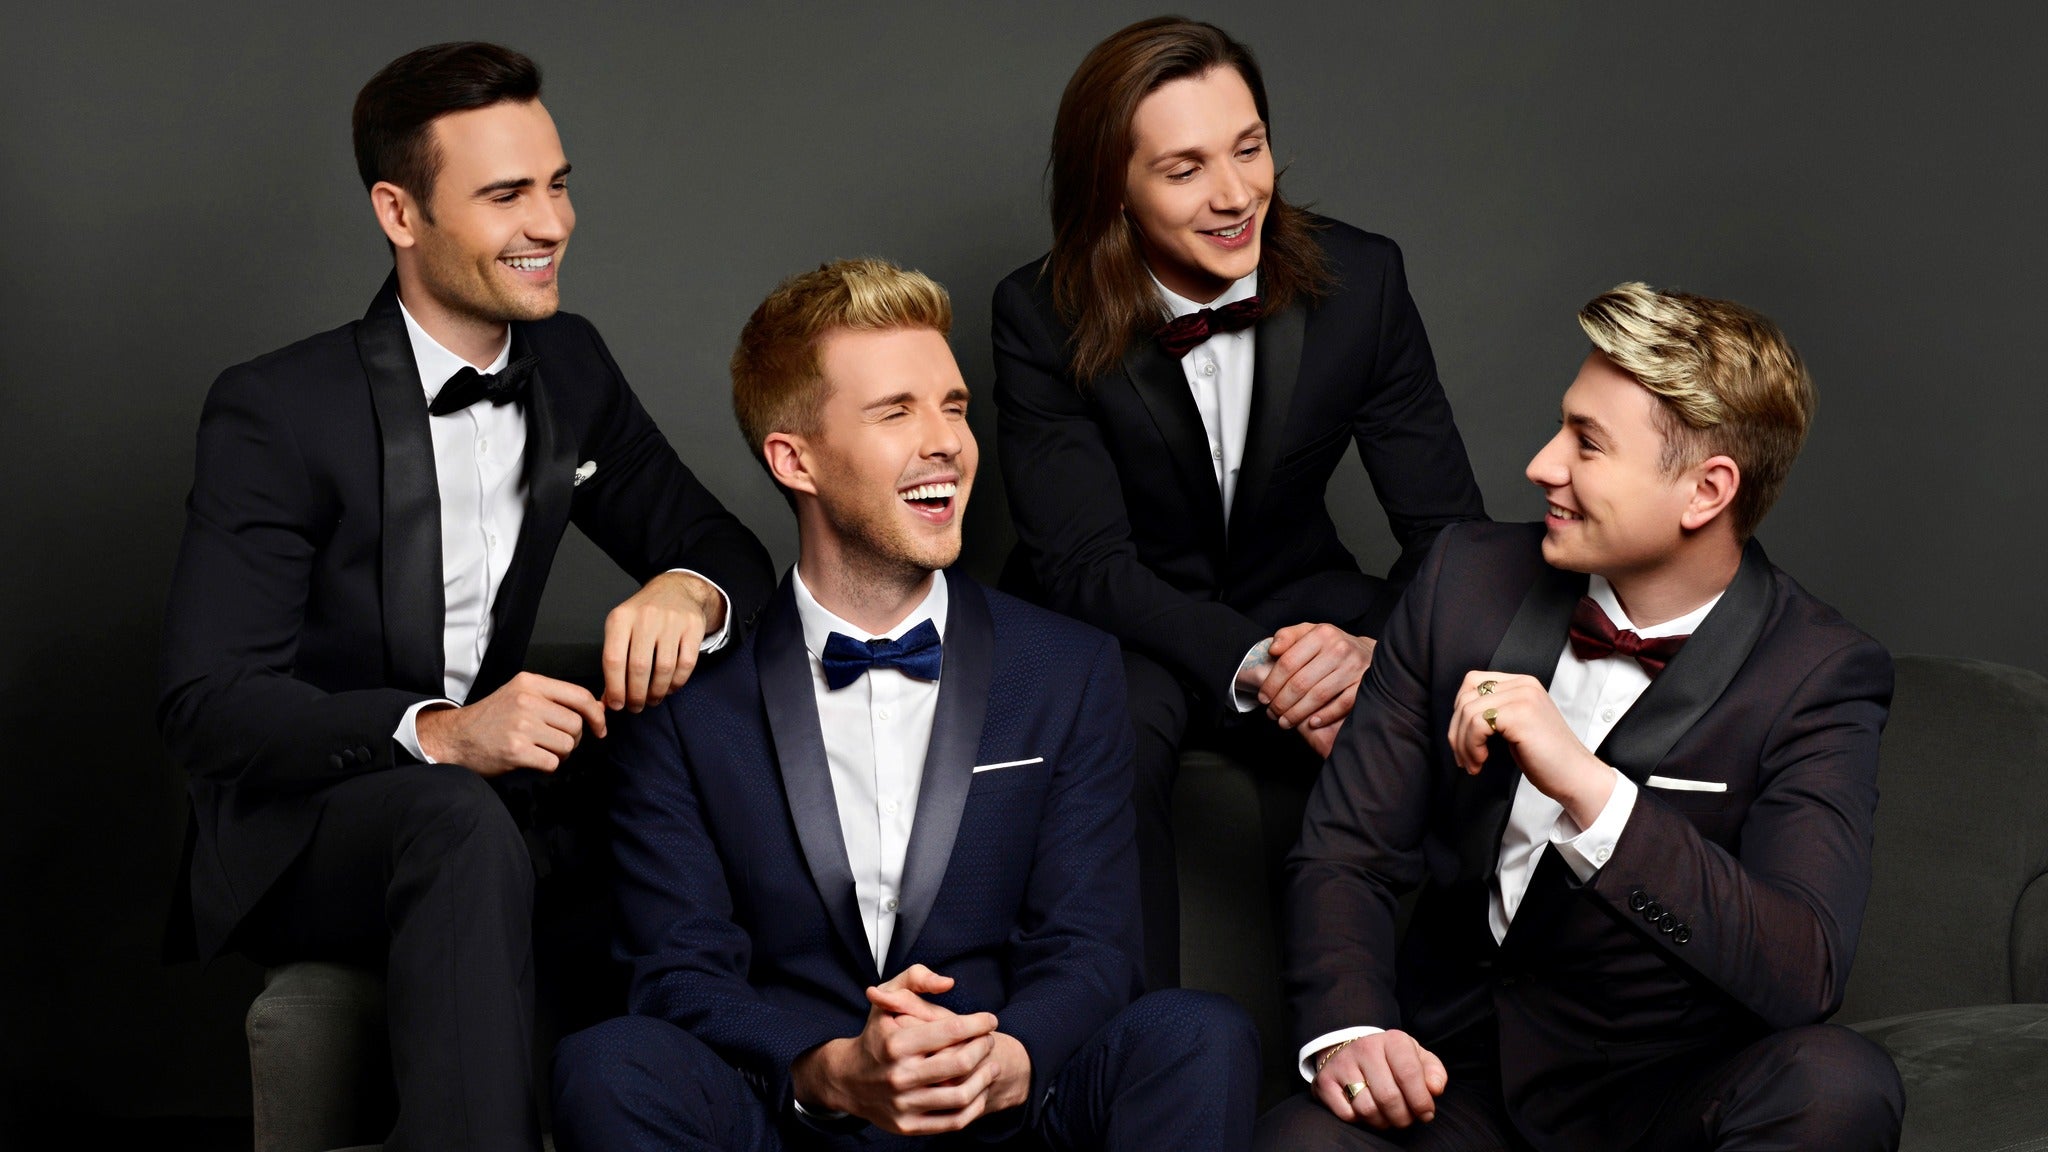 Collabro: The Christmas Is Here Tour